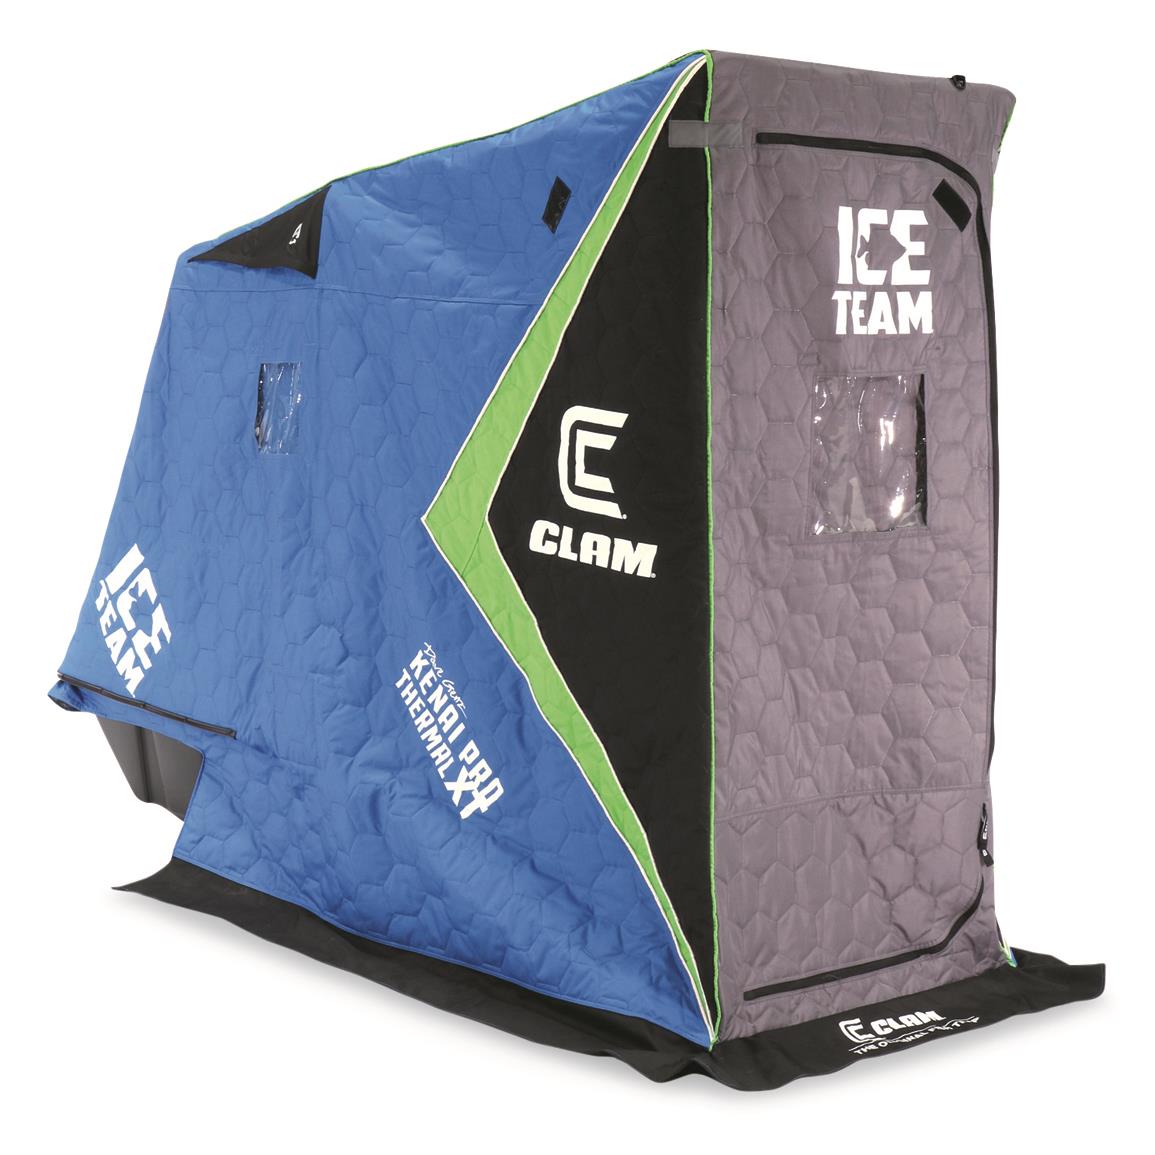 Clam Ice Team Kenai XT Thermal Ice Fishing Shelter, 1-Person